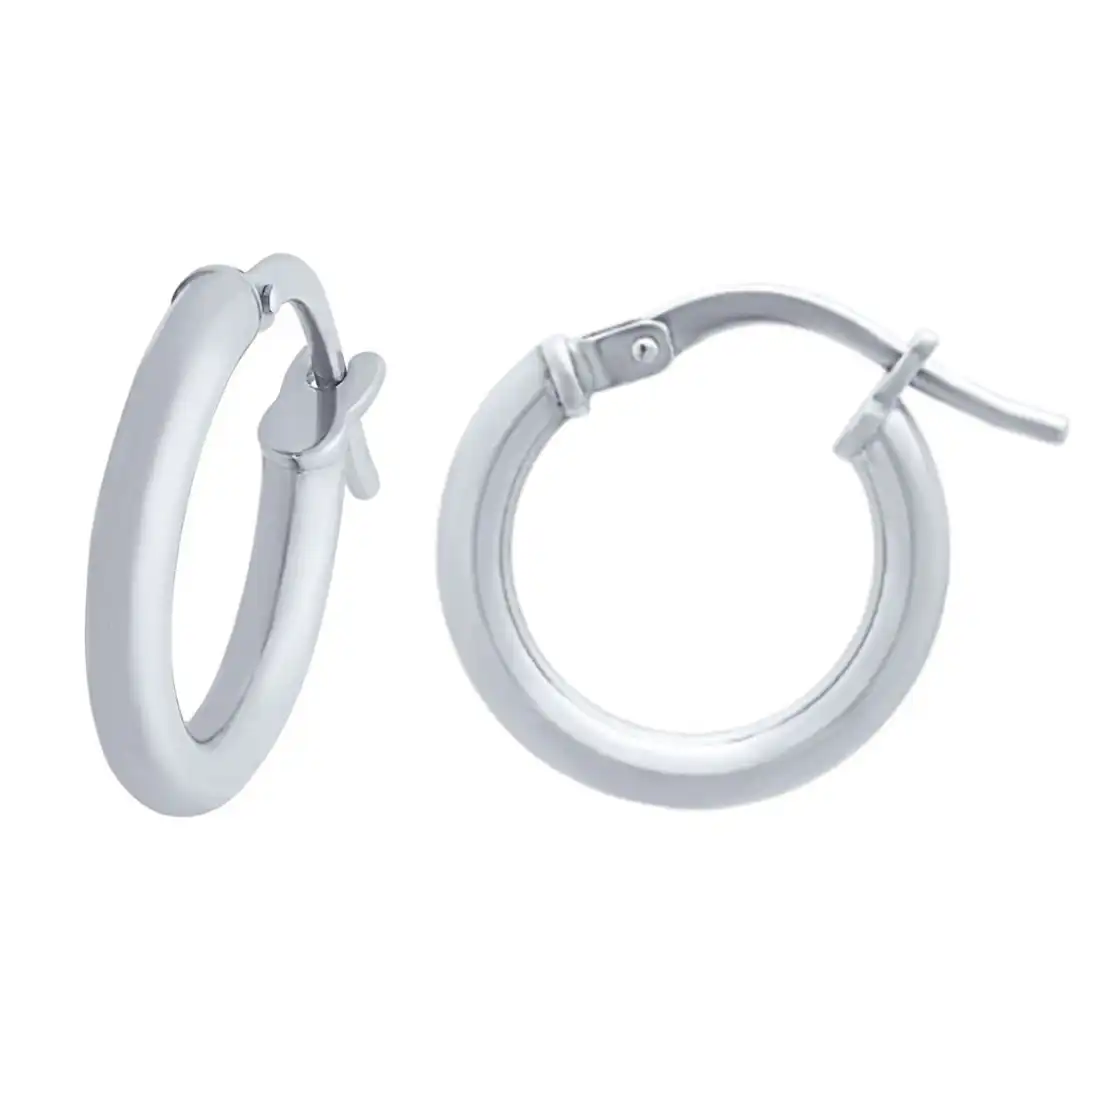 9ct White Gold Silver Infused Plain Hoop Earrings 2mm x 10mm